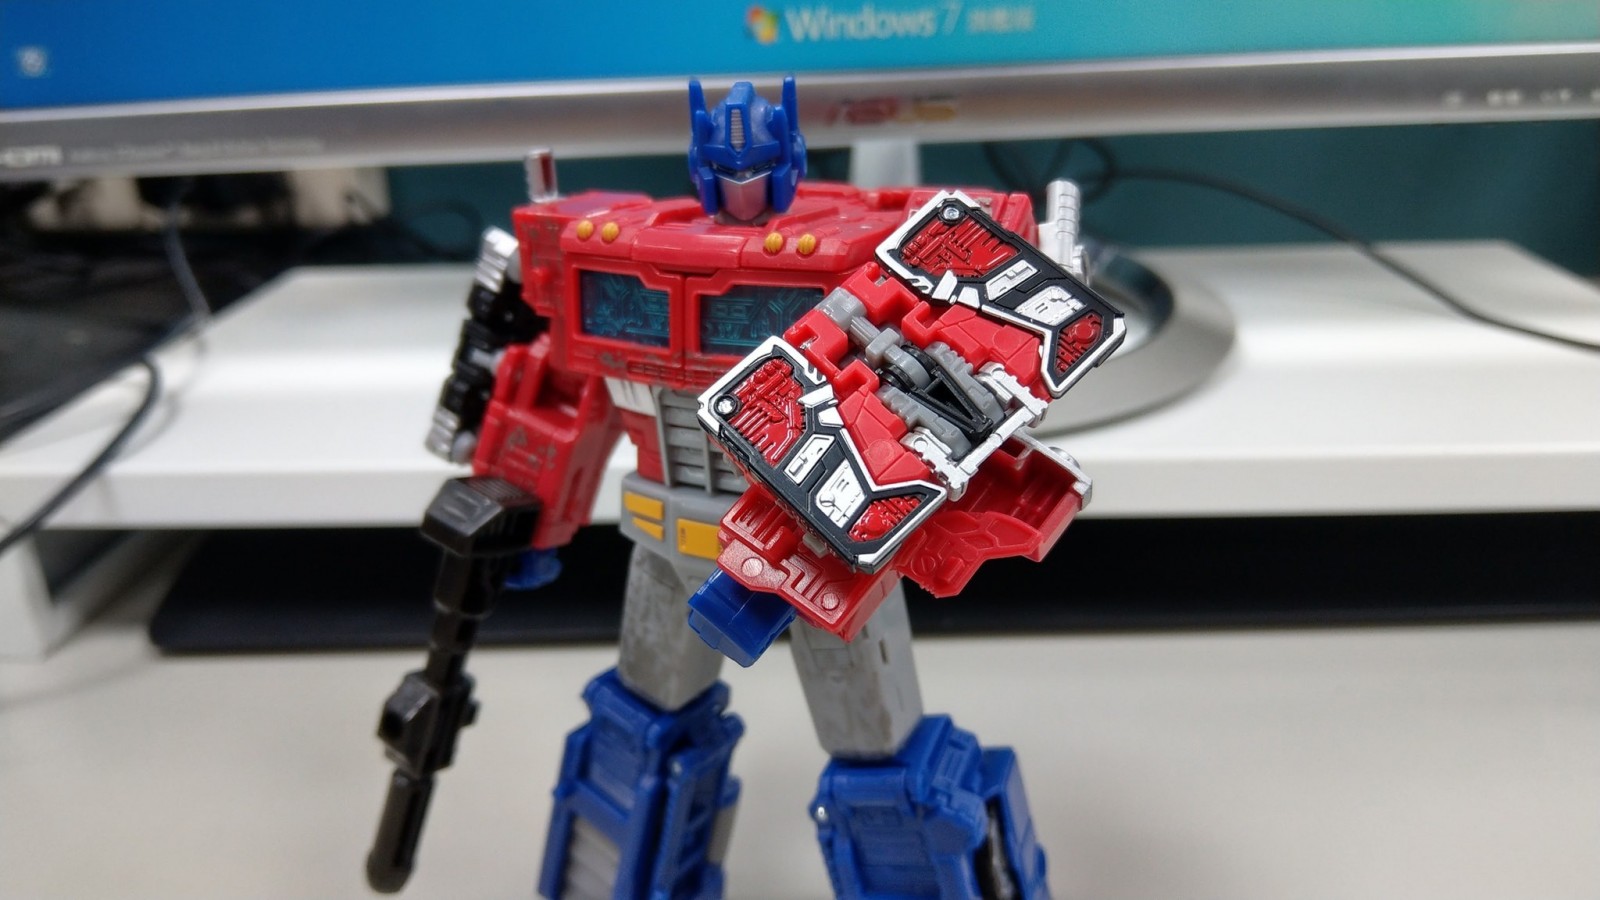 Transformers News: In Hand Images of Transformers Siege Wave 2 Micromasters